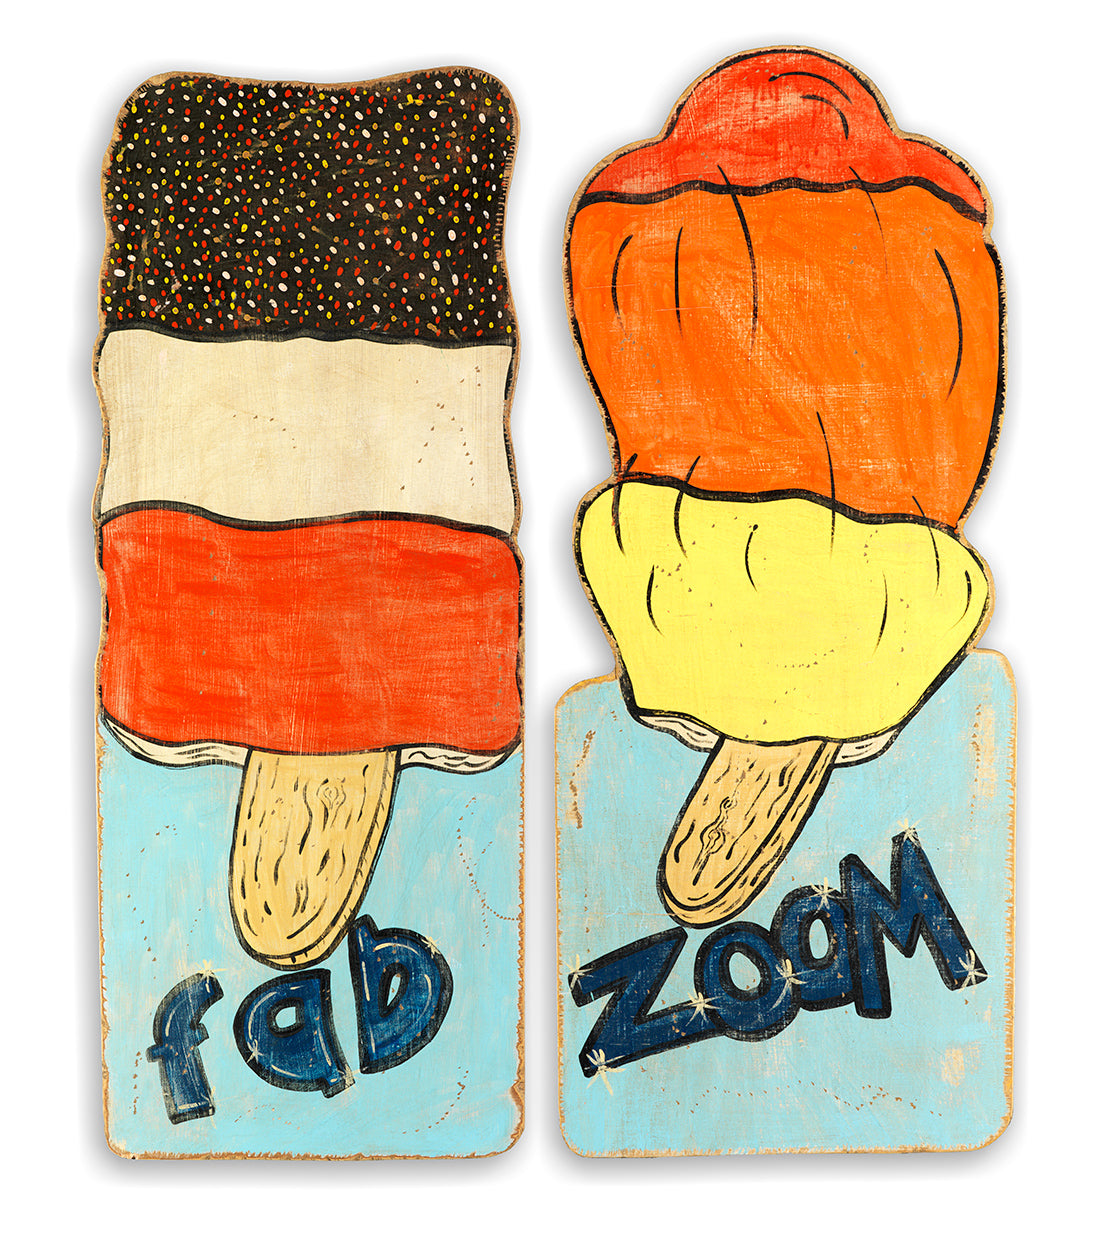 Vintage Ice Cream Trade Signs for "fab" and "zoom"